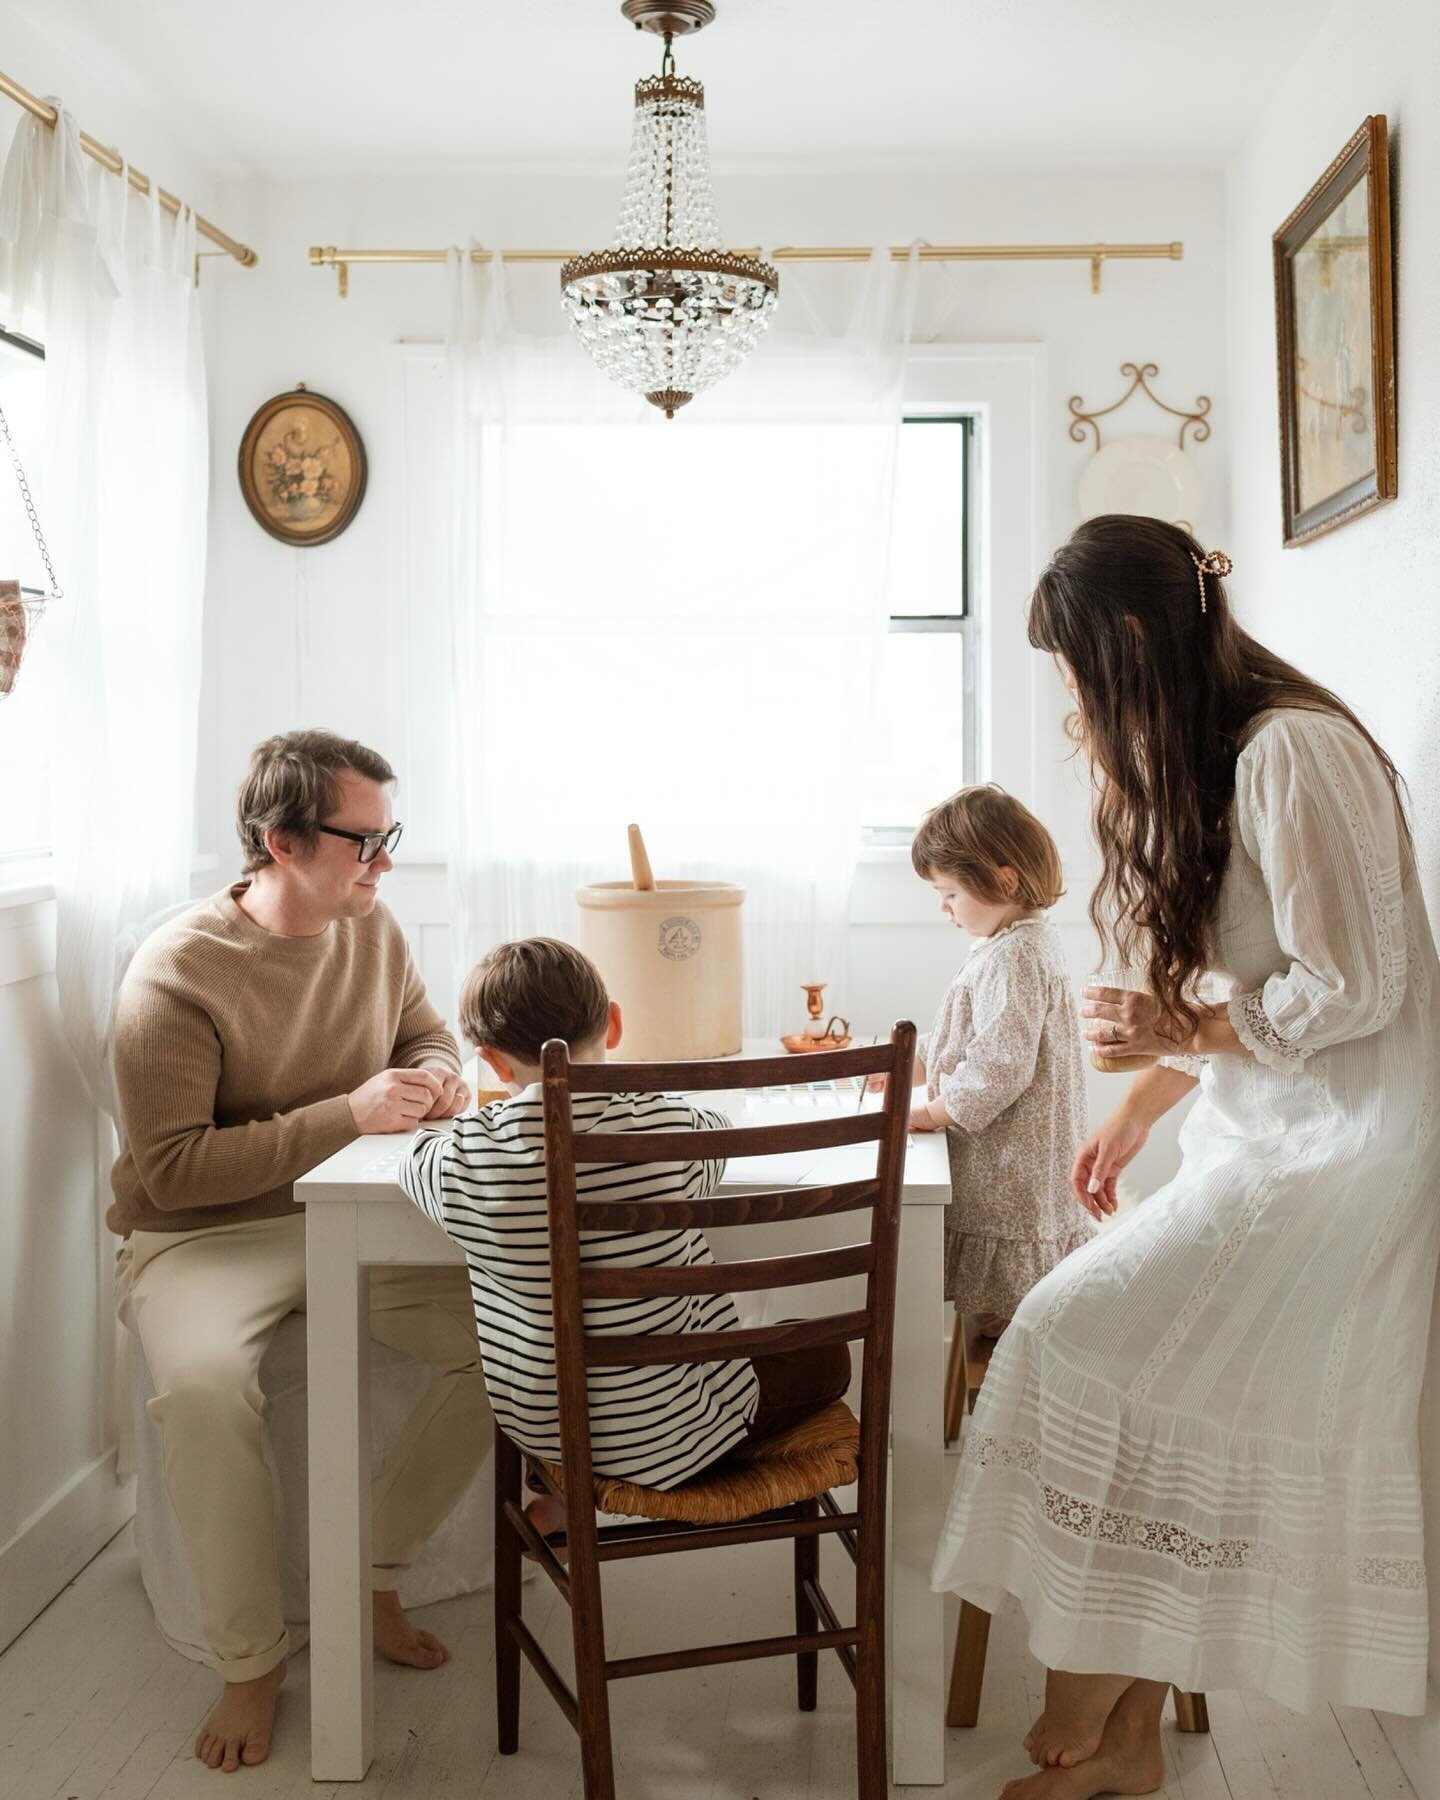 what this family embodies so well&mdash;the magic and wonder of childhood. the space to play and imagine and make. 10am s&rsquo;mores on the weekend at the living room fireplace, dance parties with disco lights in the middle of the day, quiet moments